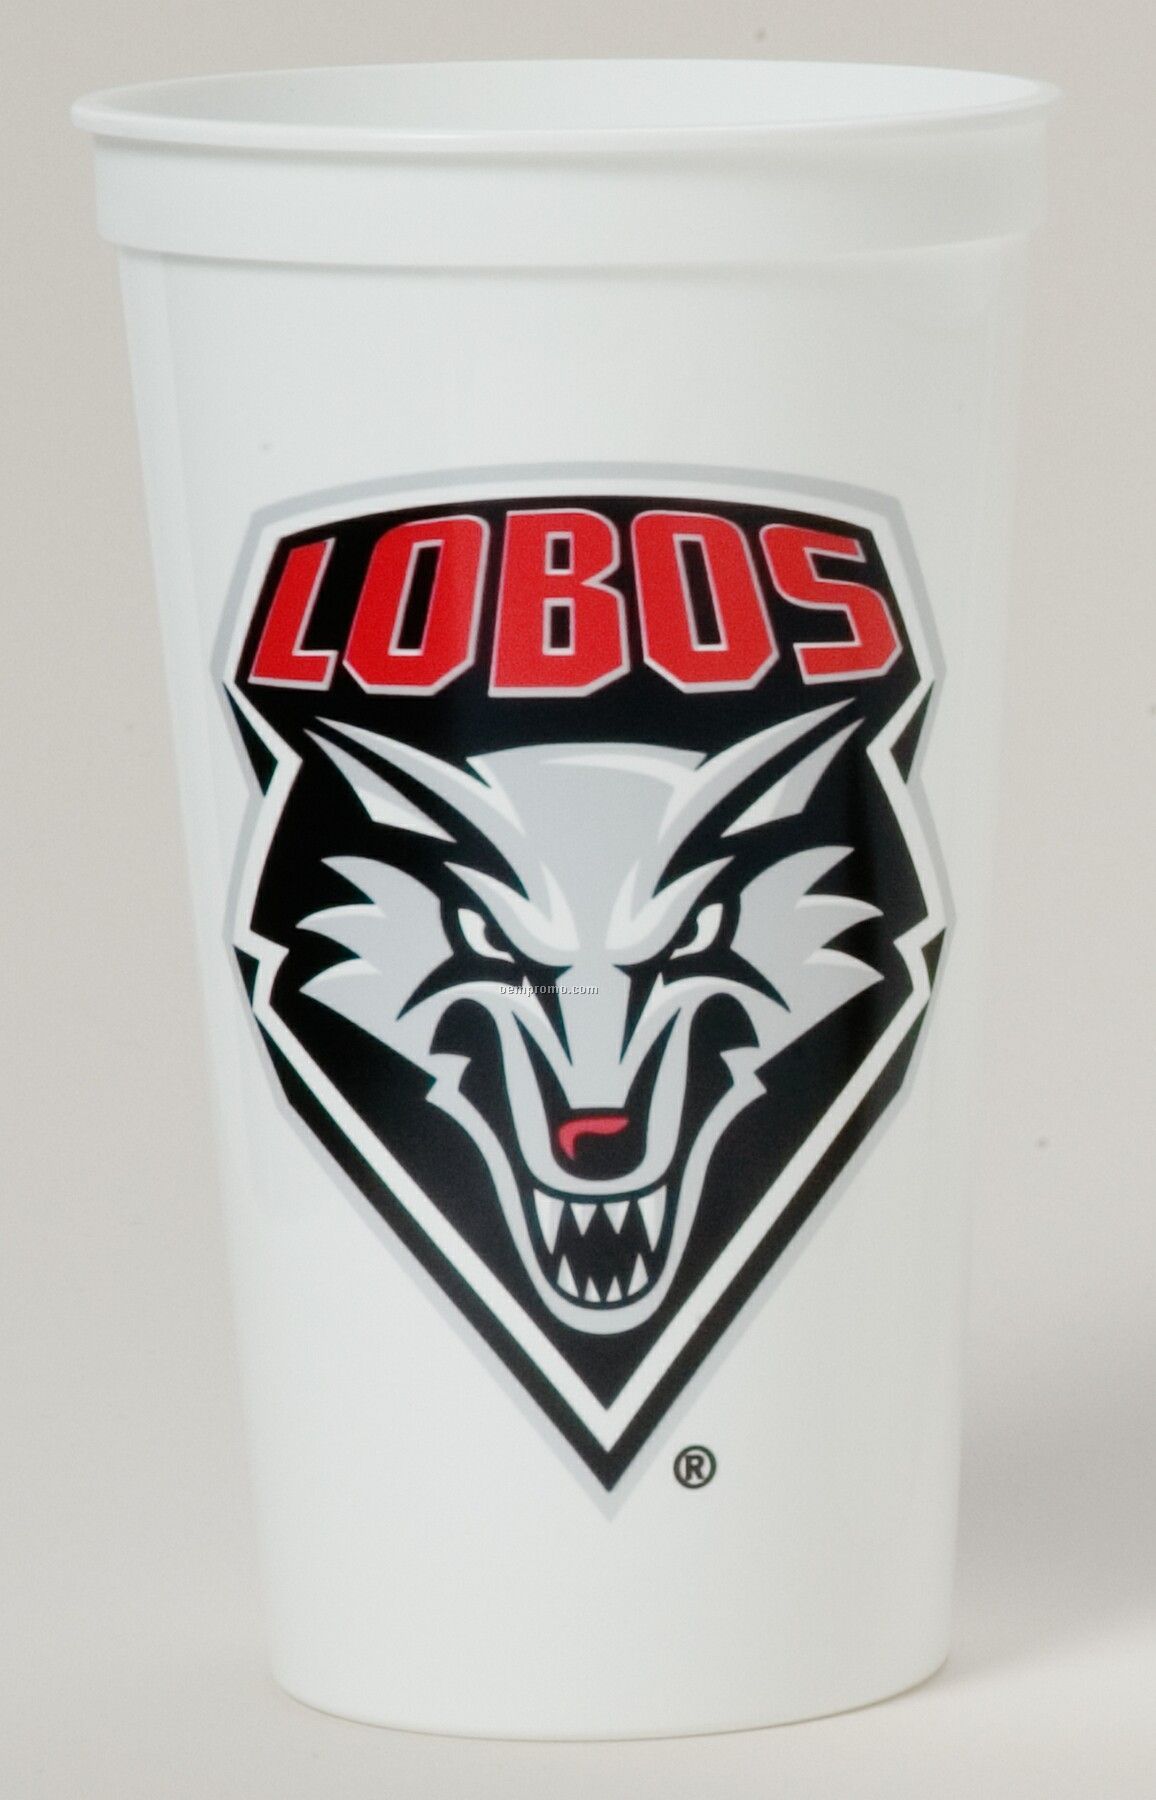 32 Oz. Smooth White Stadium Cup (1 Color Offset Imprint)